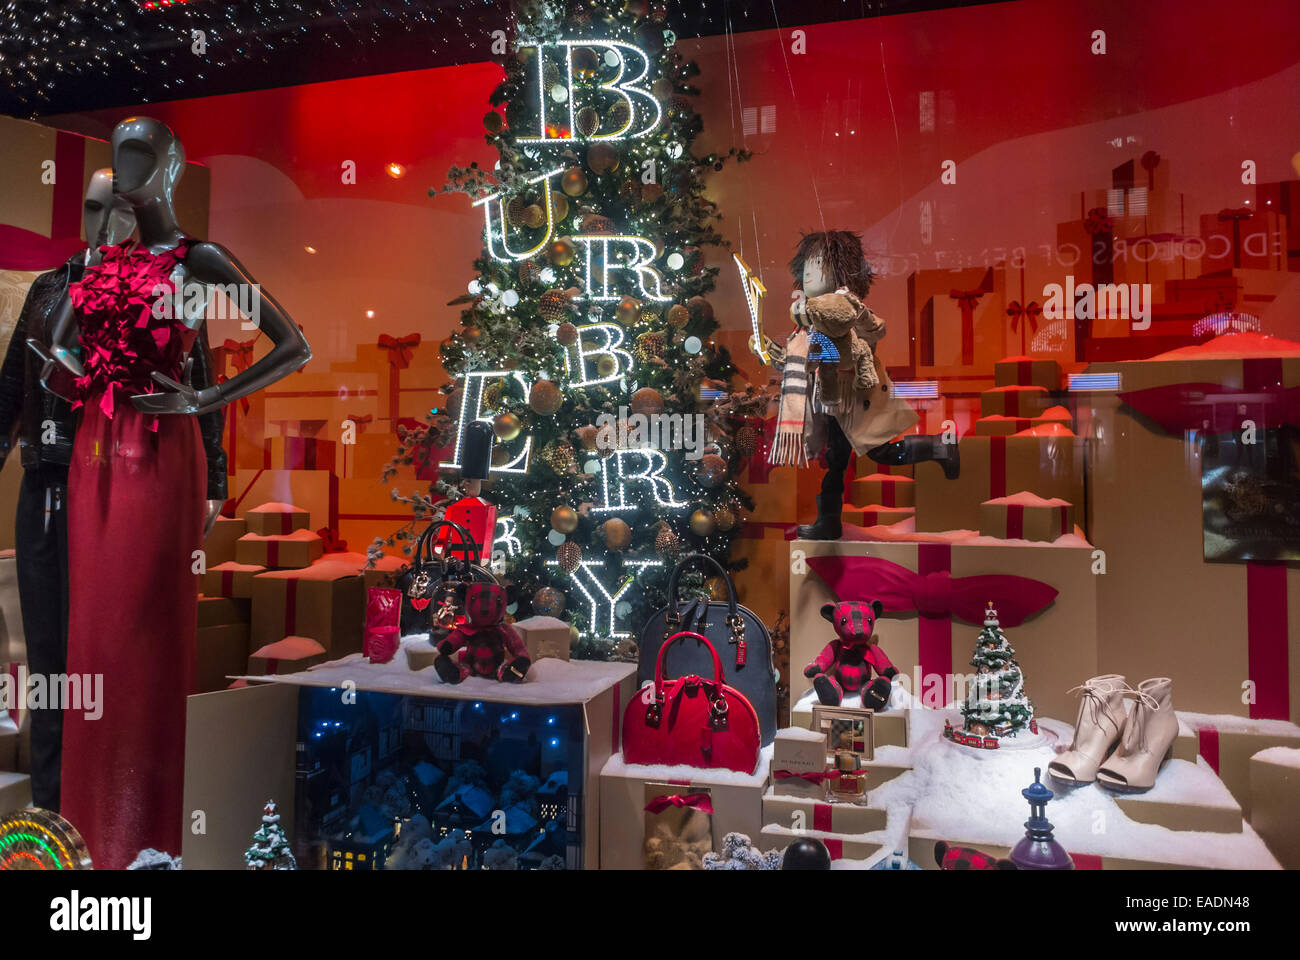 Visual Merchandising & Window Display Ideas From France